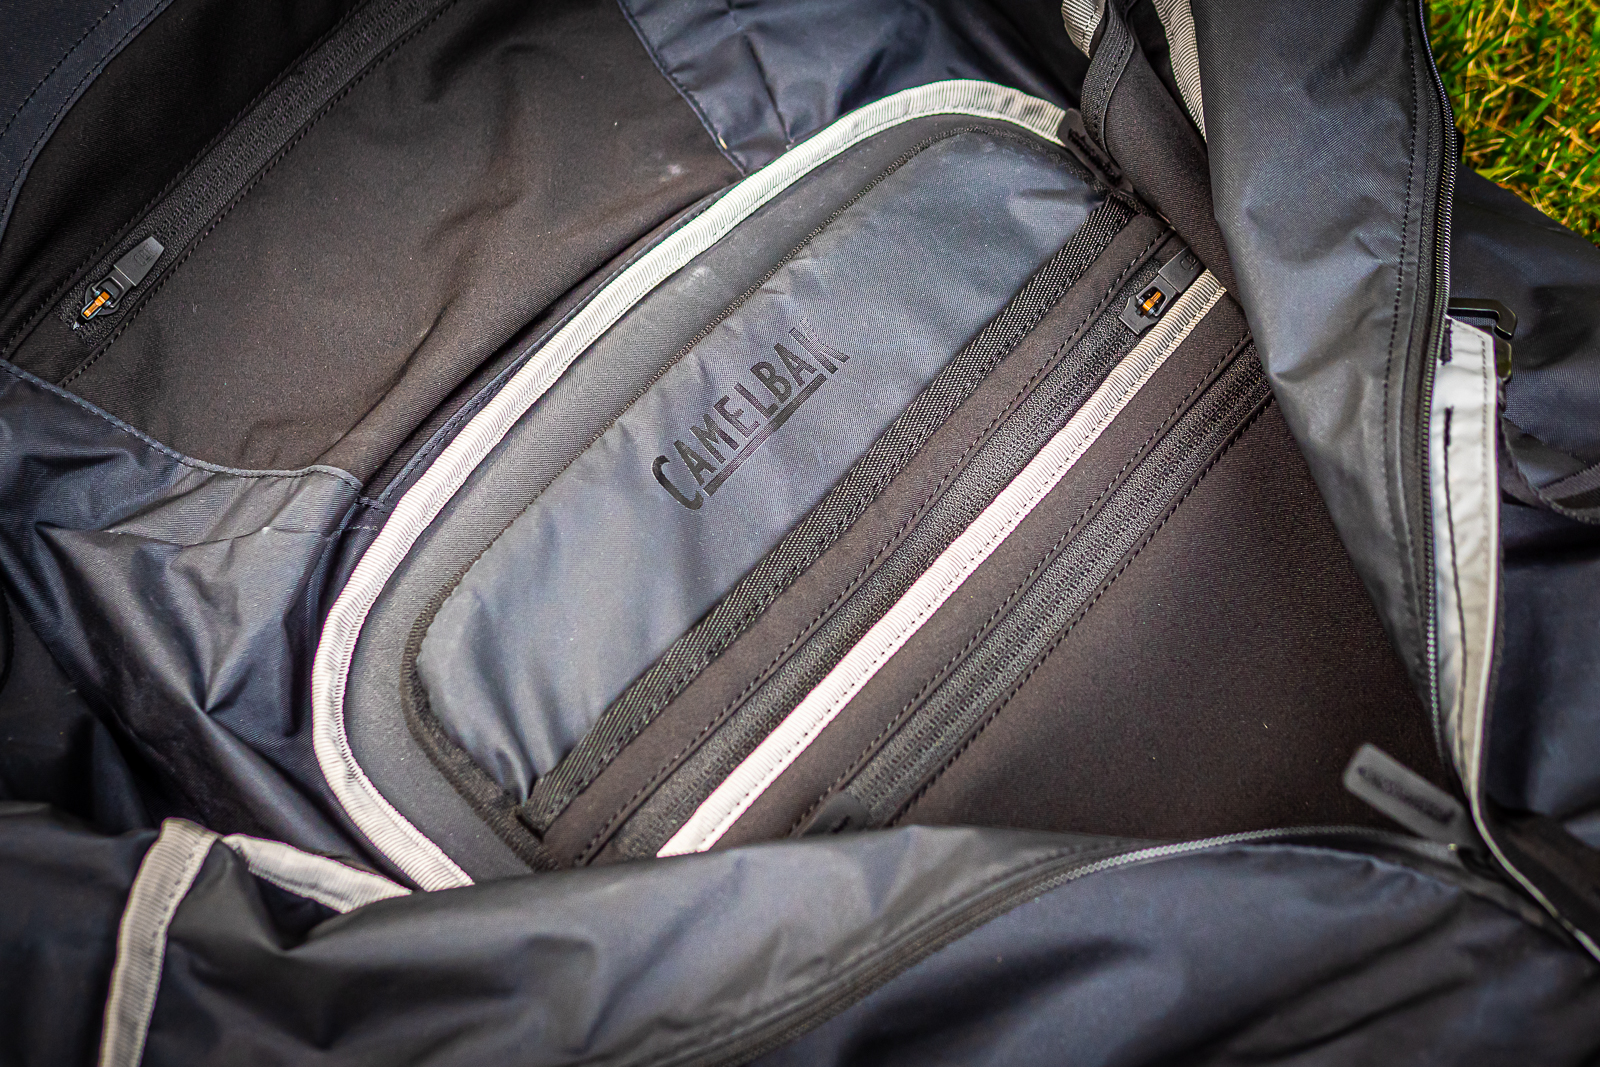 Exclusive First Look | Camelbak Adventure Travel Packs (A.T.P.™)